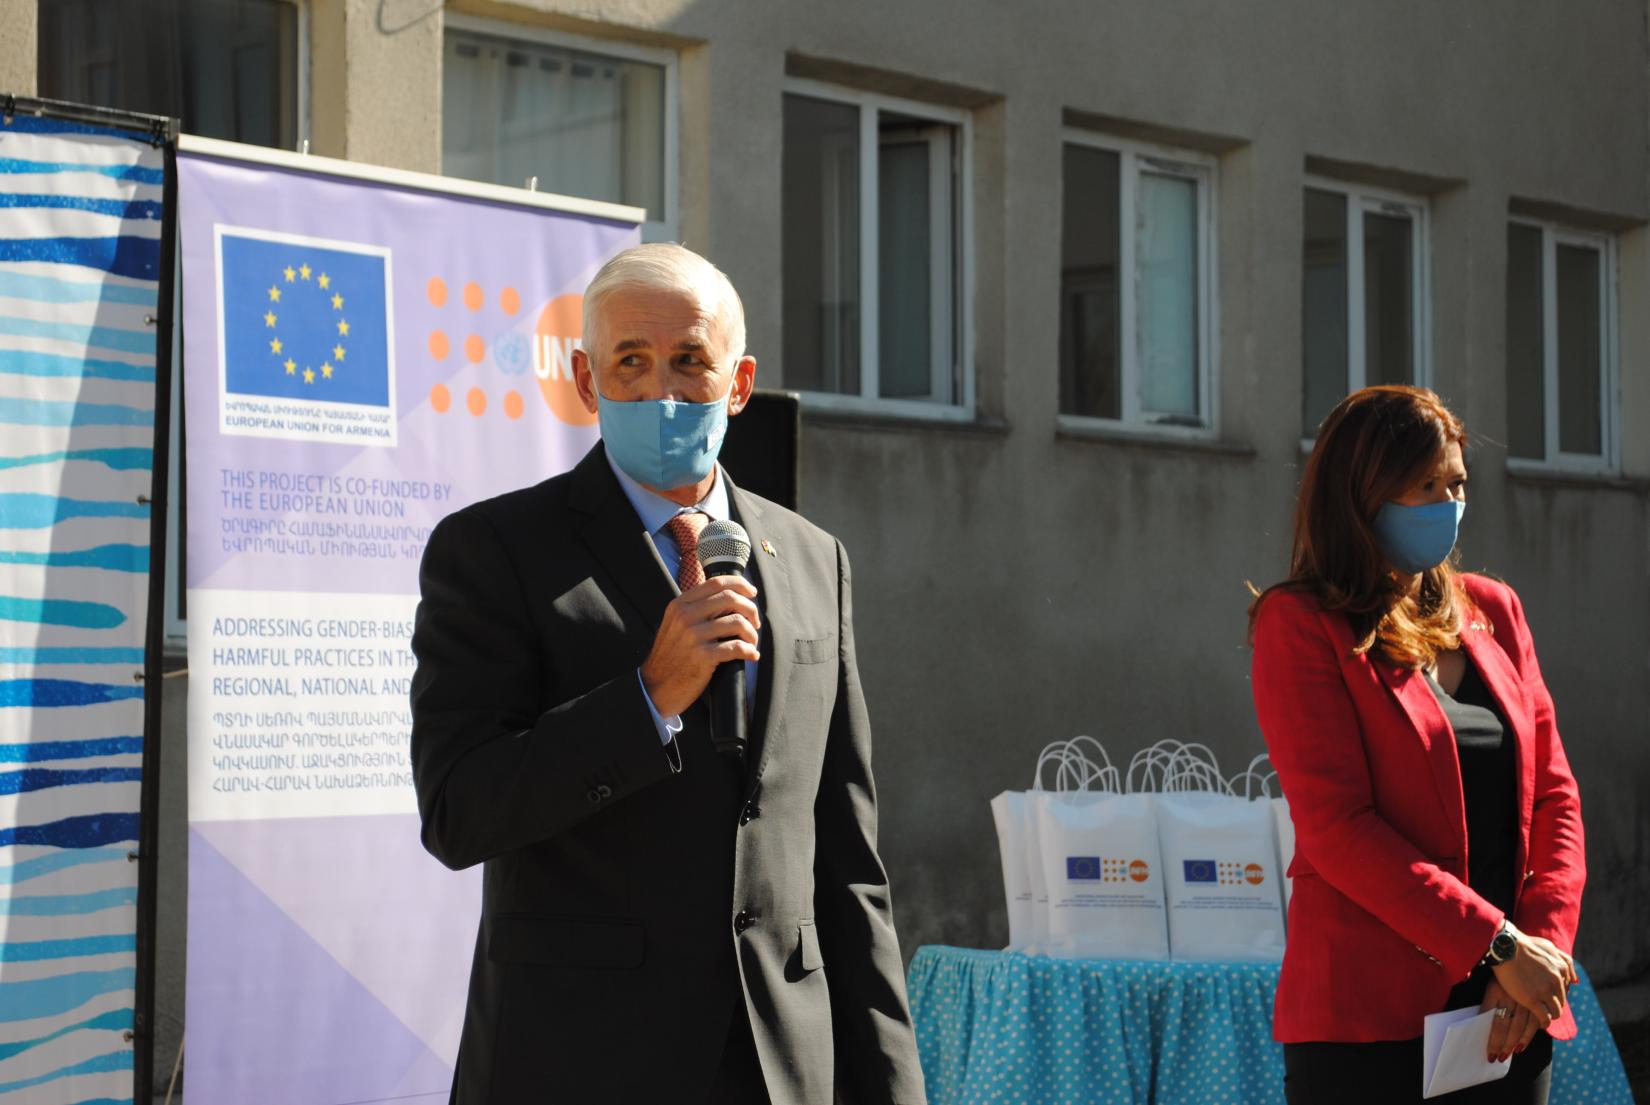 The UN Resident Coordinator in Armenia, Shombi Sharp while delivering his speech.